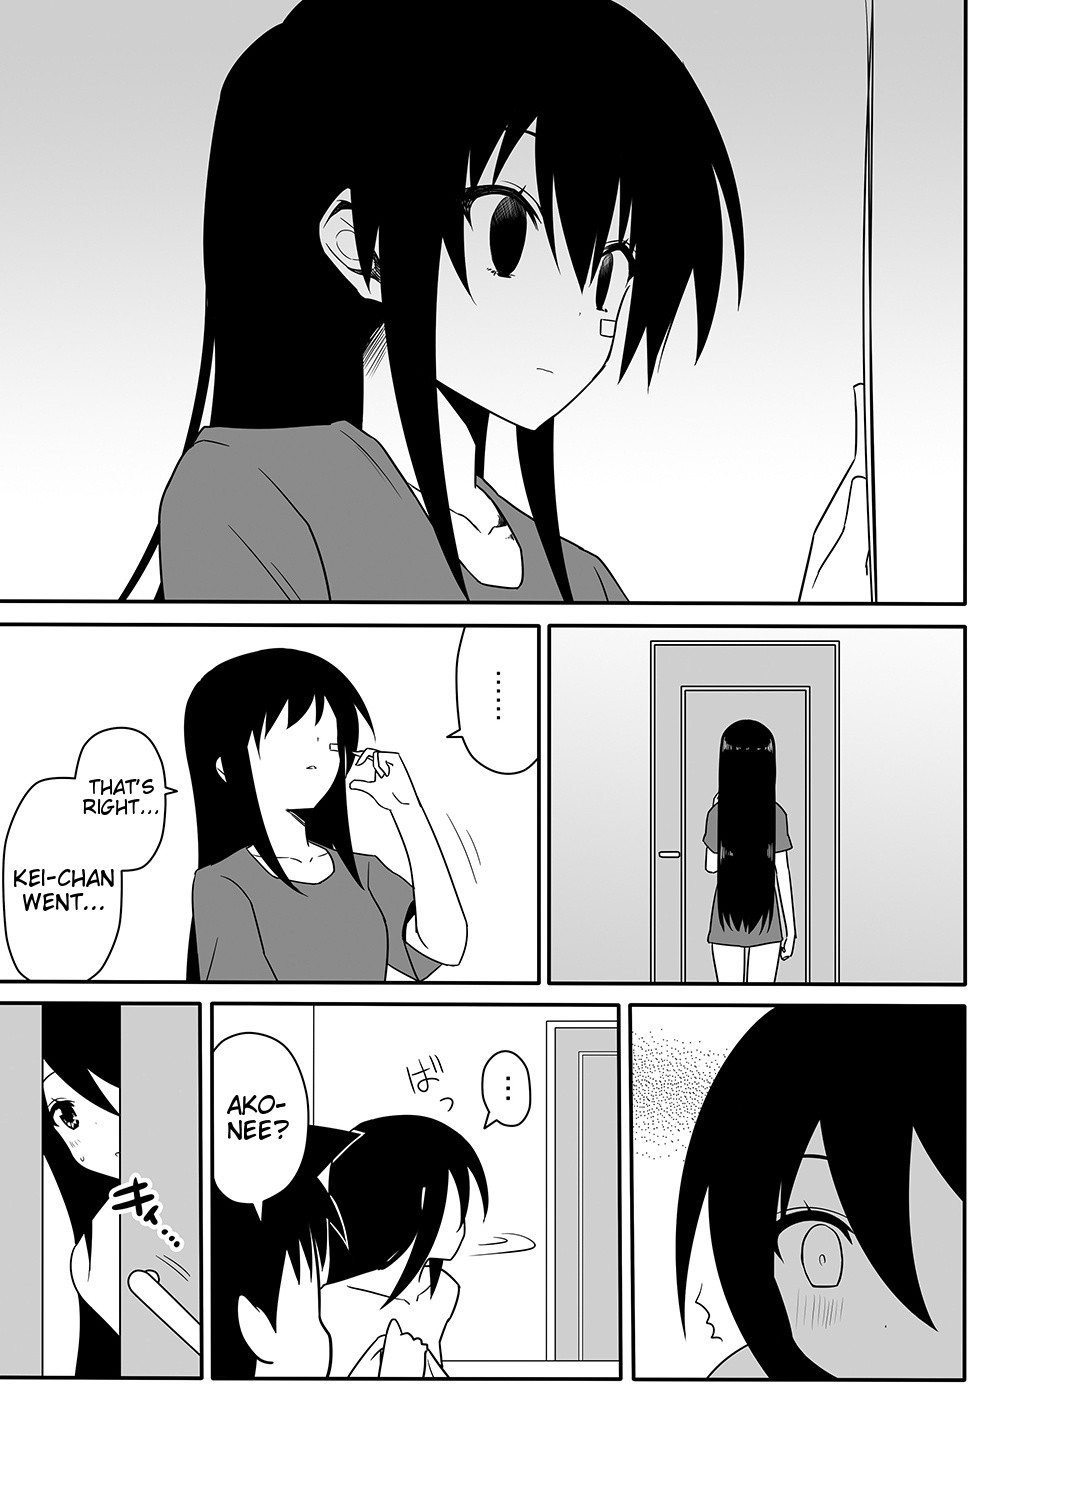 The day I went over the line with Ako-nee hentai manga picture 20